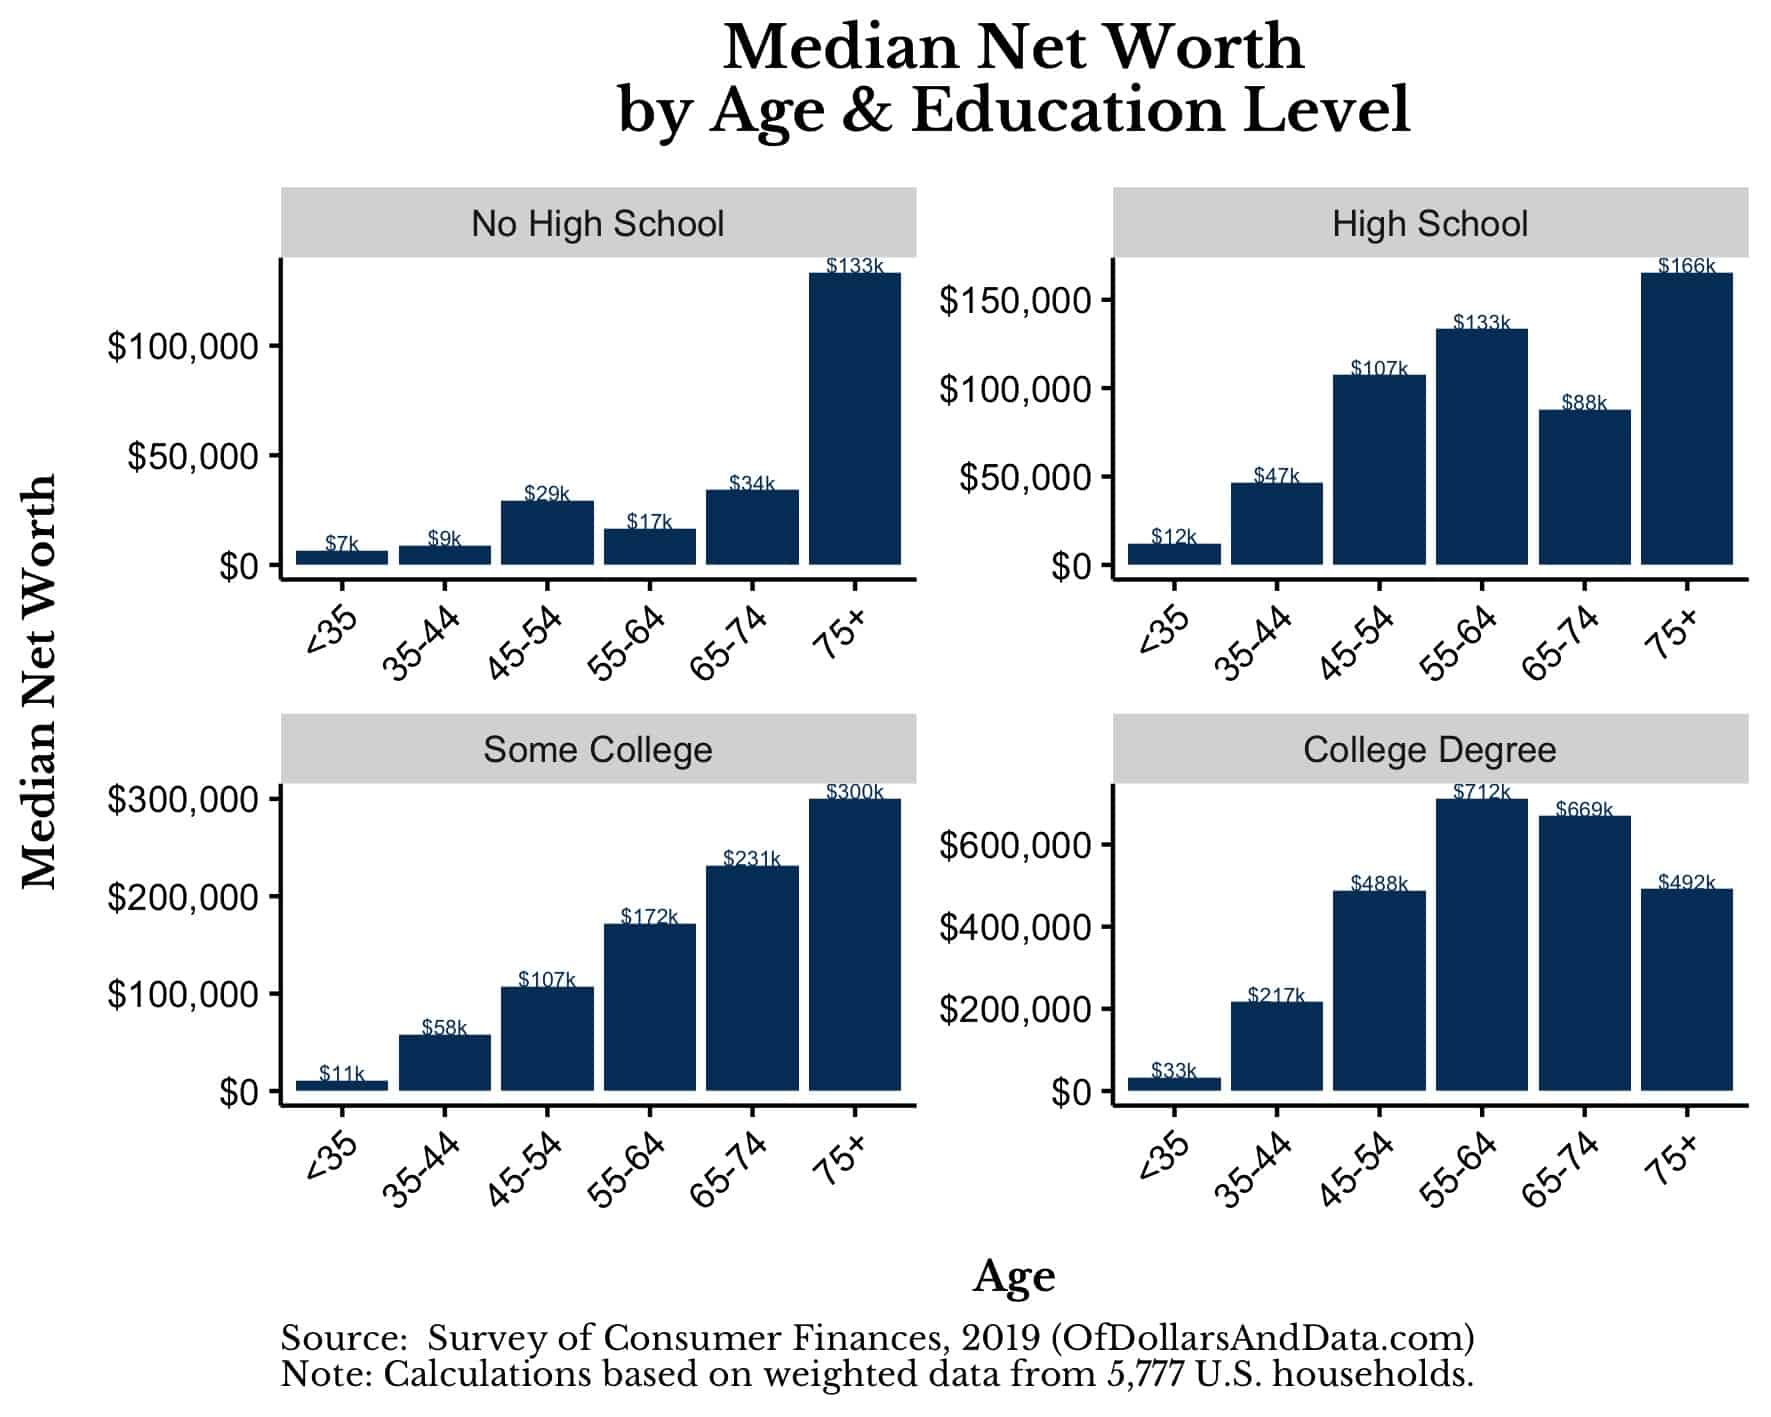 Median net worth by age and education level for the 2019 Survey of Consumer Finances